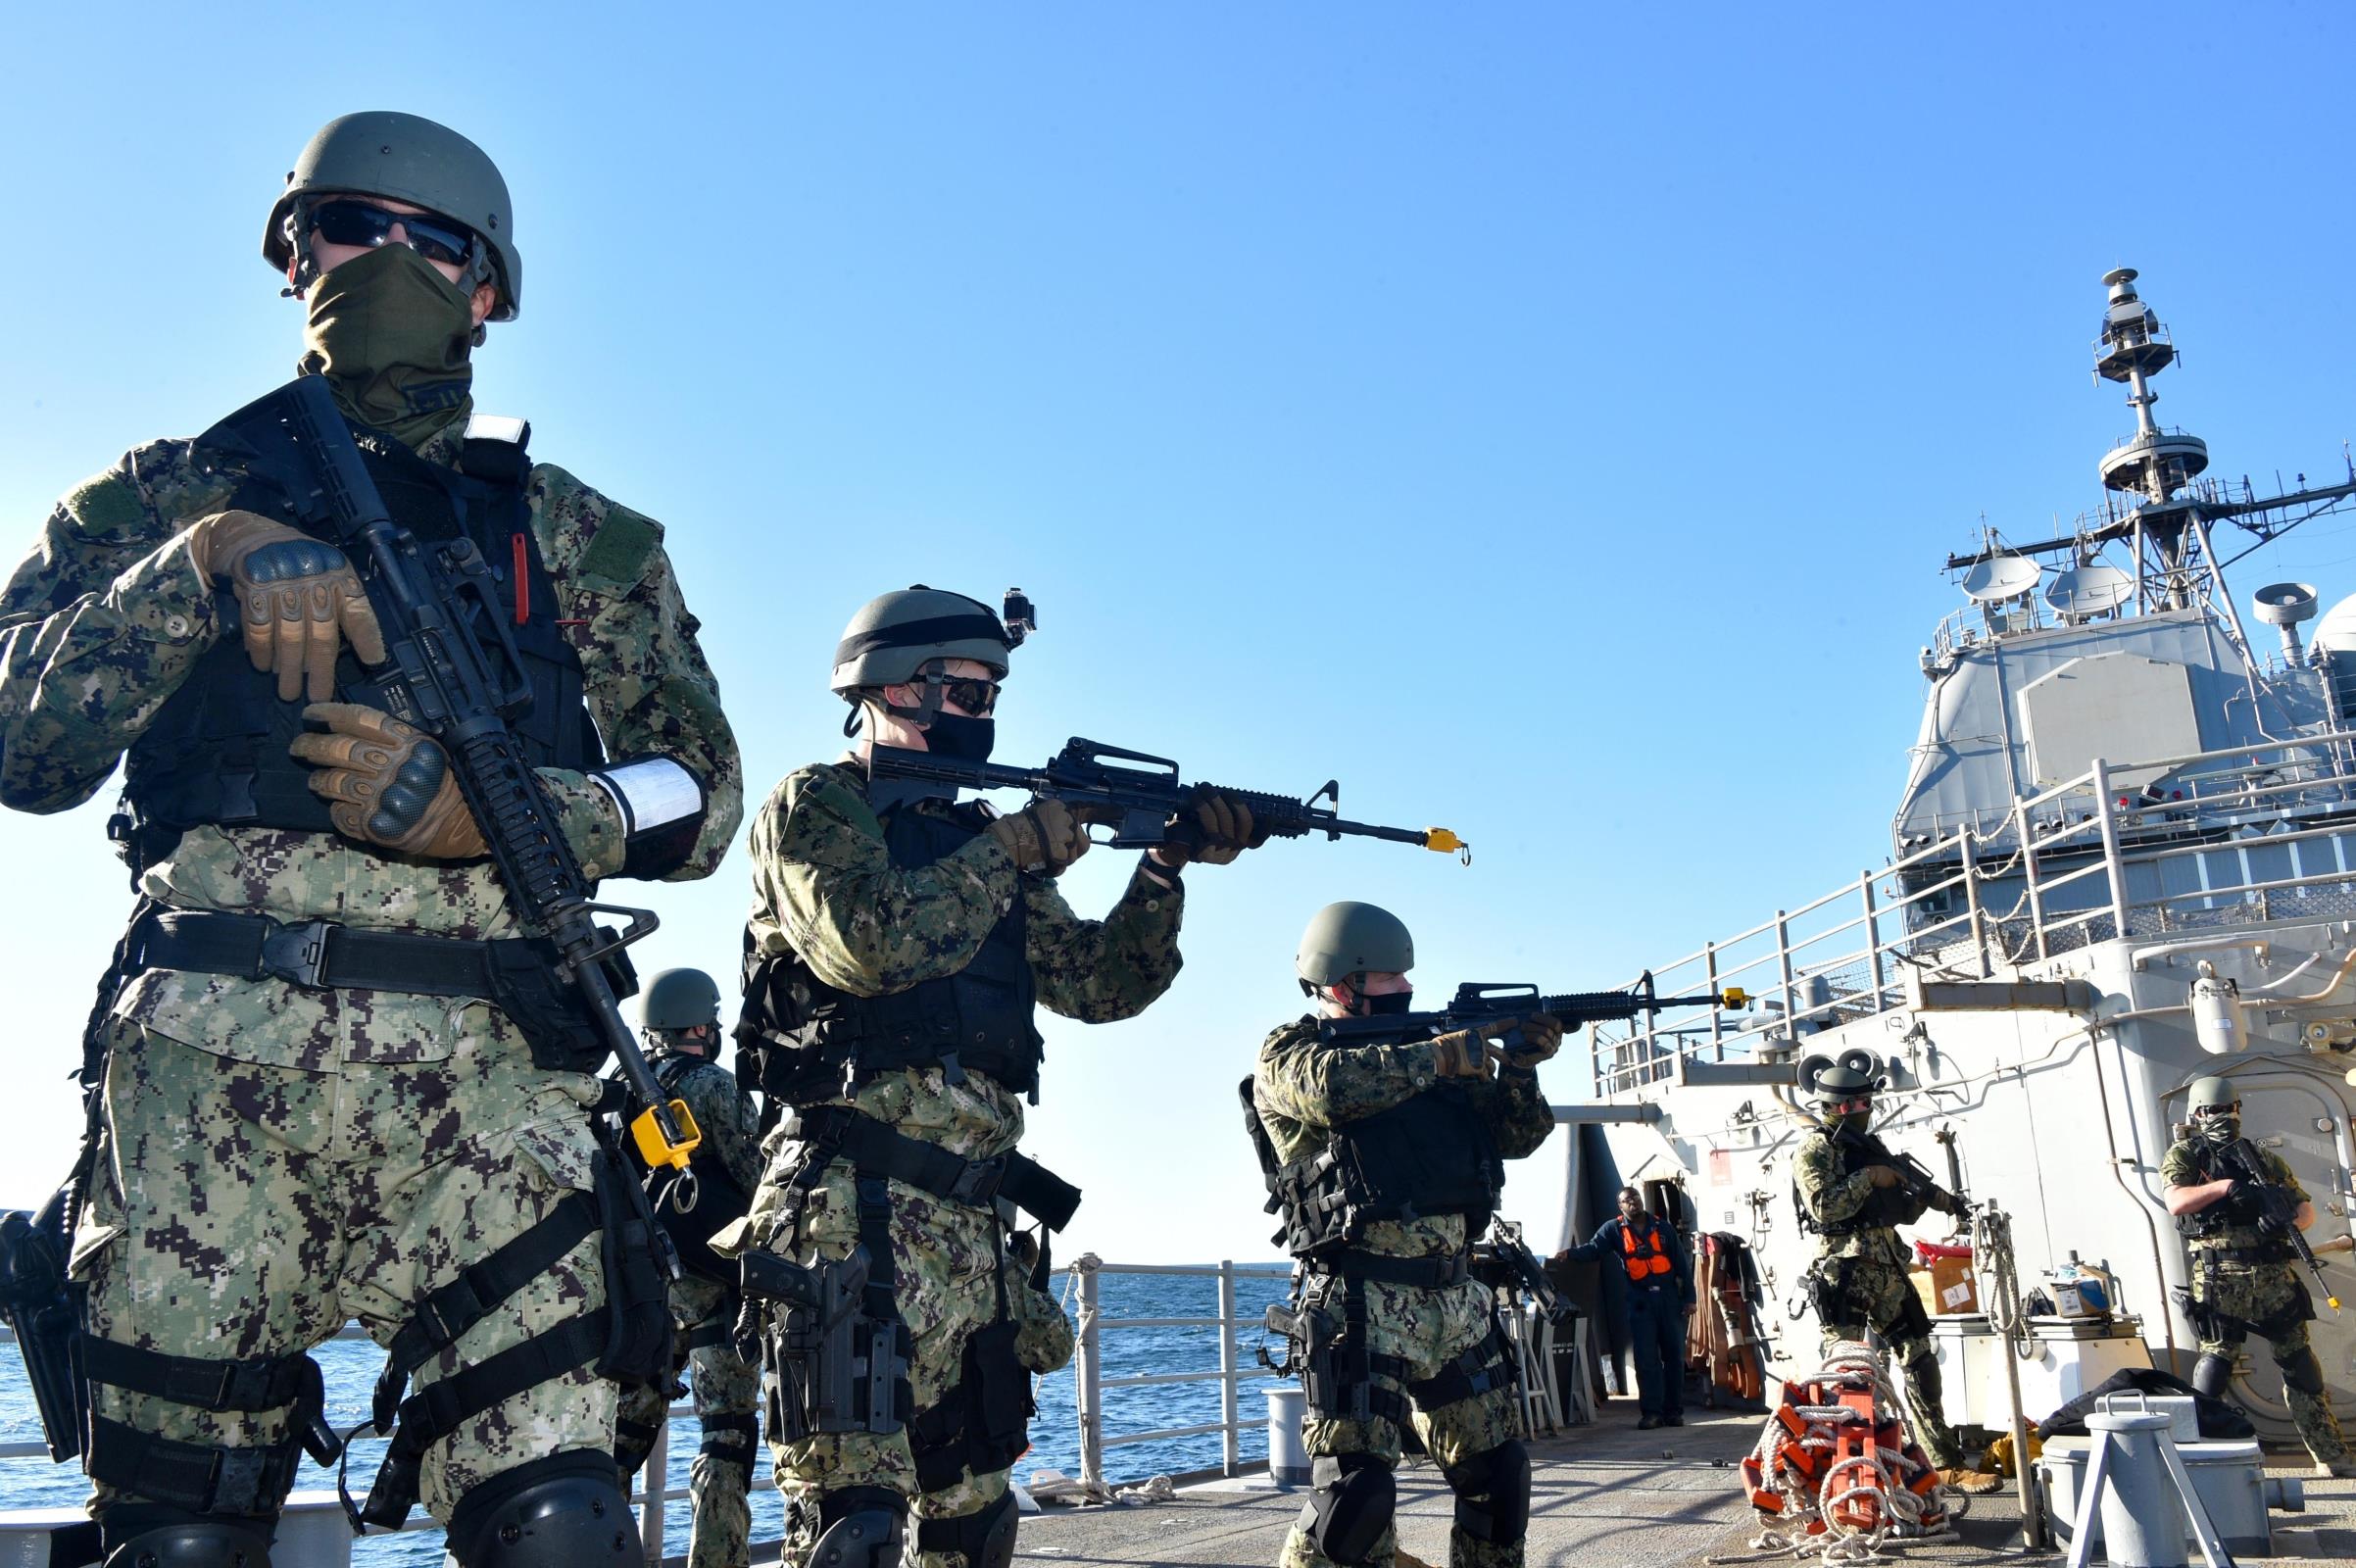 GULF OF OMAN (Jan. 11, 2021) Sailors assigned to the guided-missile destroyer John Paul Jones (DDG 53) conduct a visit, board, search and seizure drill aboard the guided-missile cruiser USS Philippine Sea (CG 58) in the Gulf of Oman, Jan. 11, 2021. (U.S. Navy photo by Mass Communication Specialist 2nd Class Indra Beaufort) 210111-N-IE405-1204 